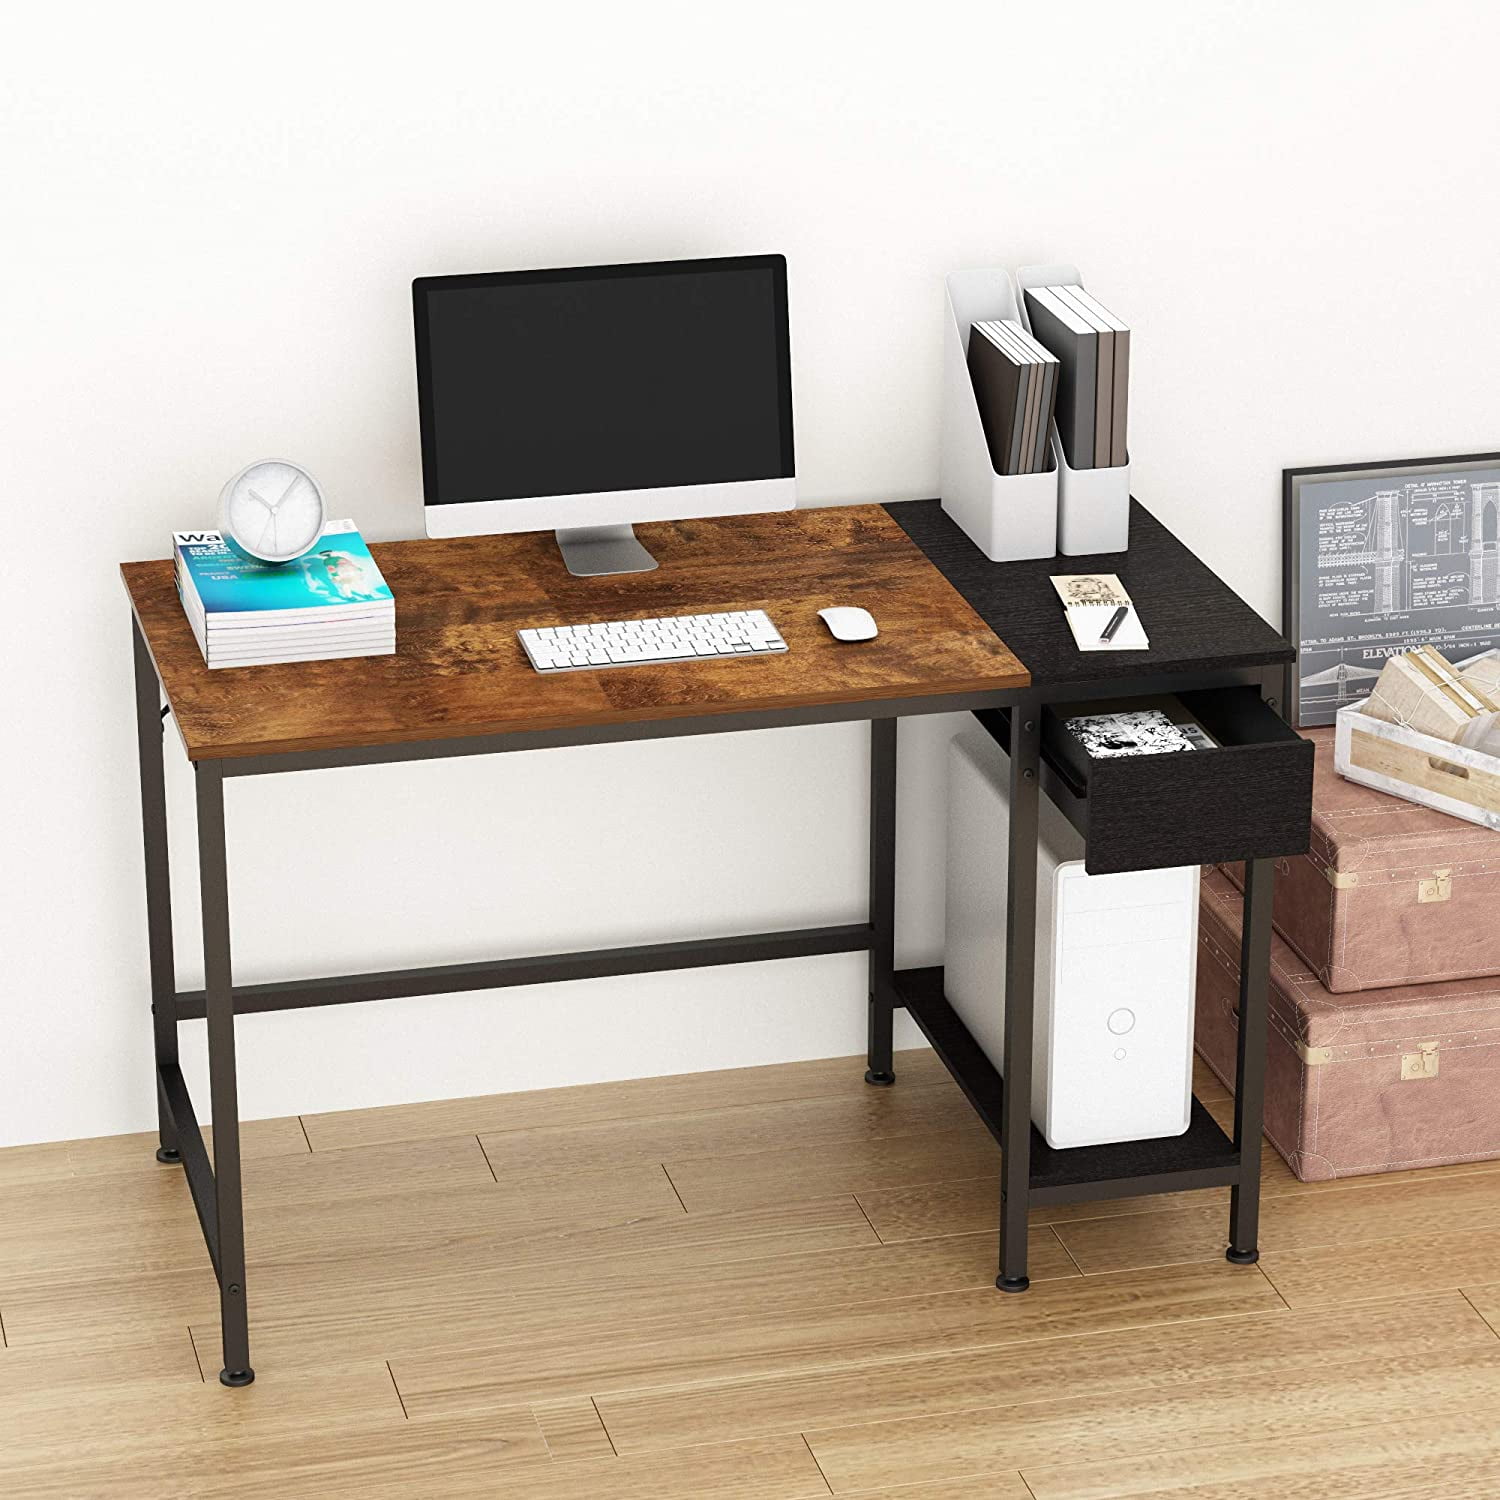 JOISCOPE Laptop Table with Non-Woven Drawer,Computer Desk with Shelves 63 inches 